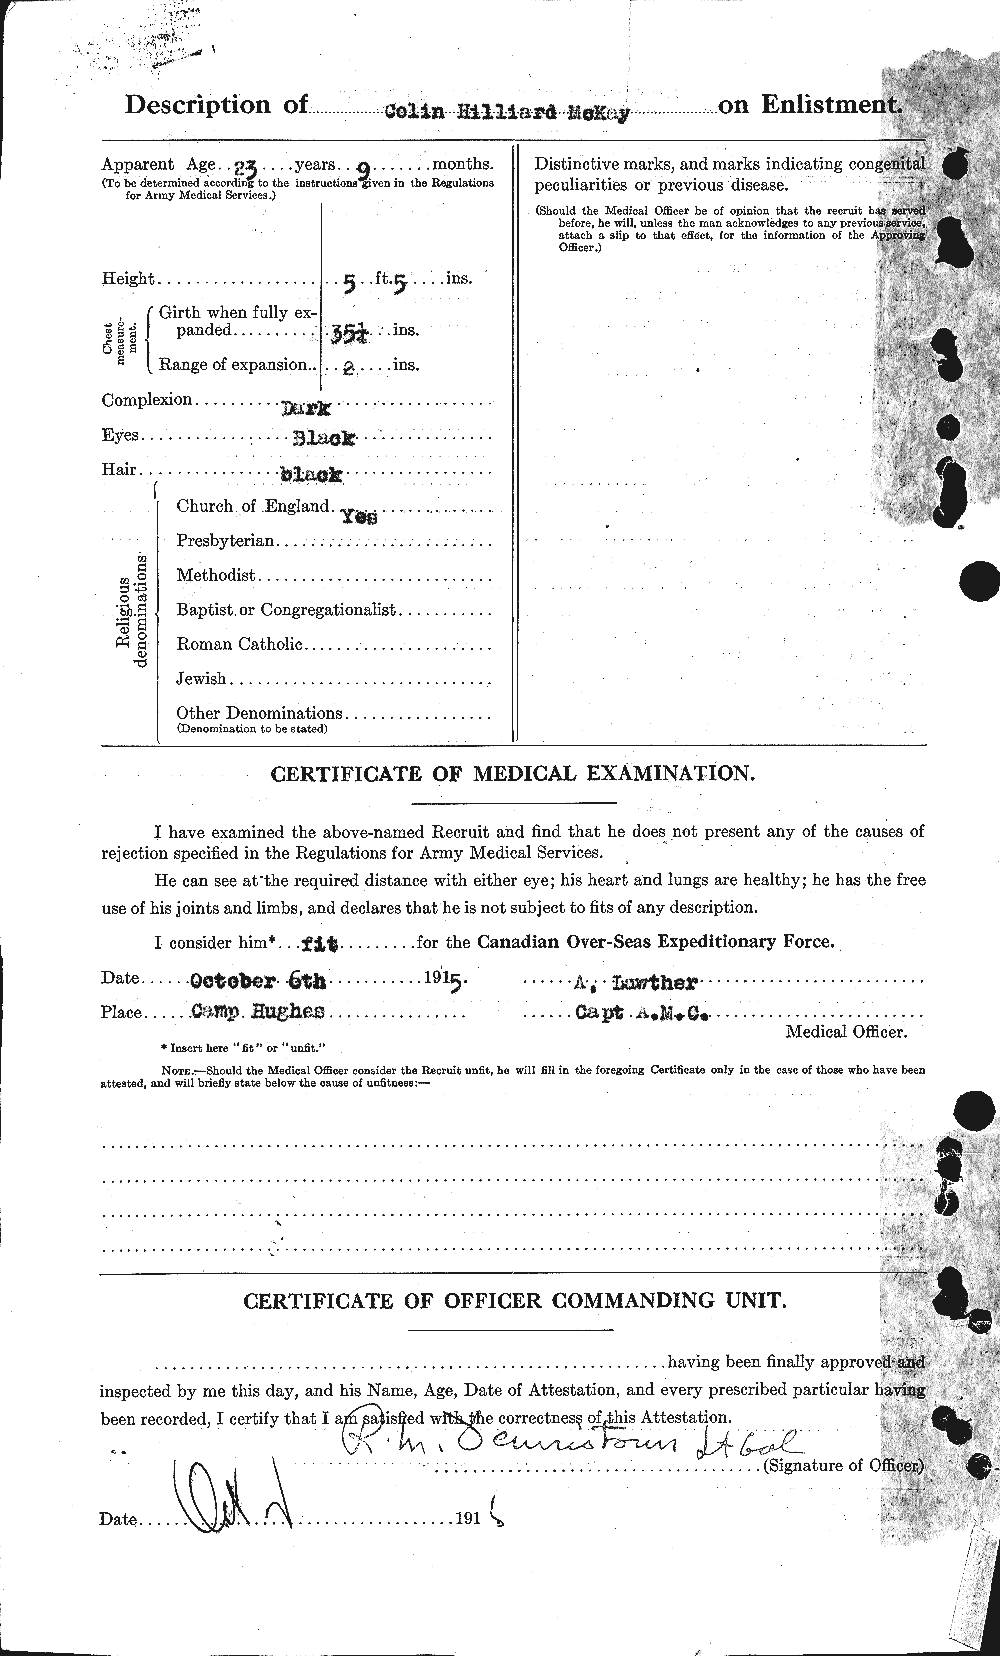 Personnel Records of the First World War - CEF 531099b